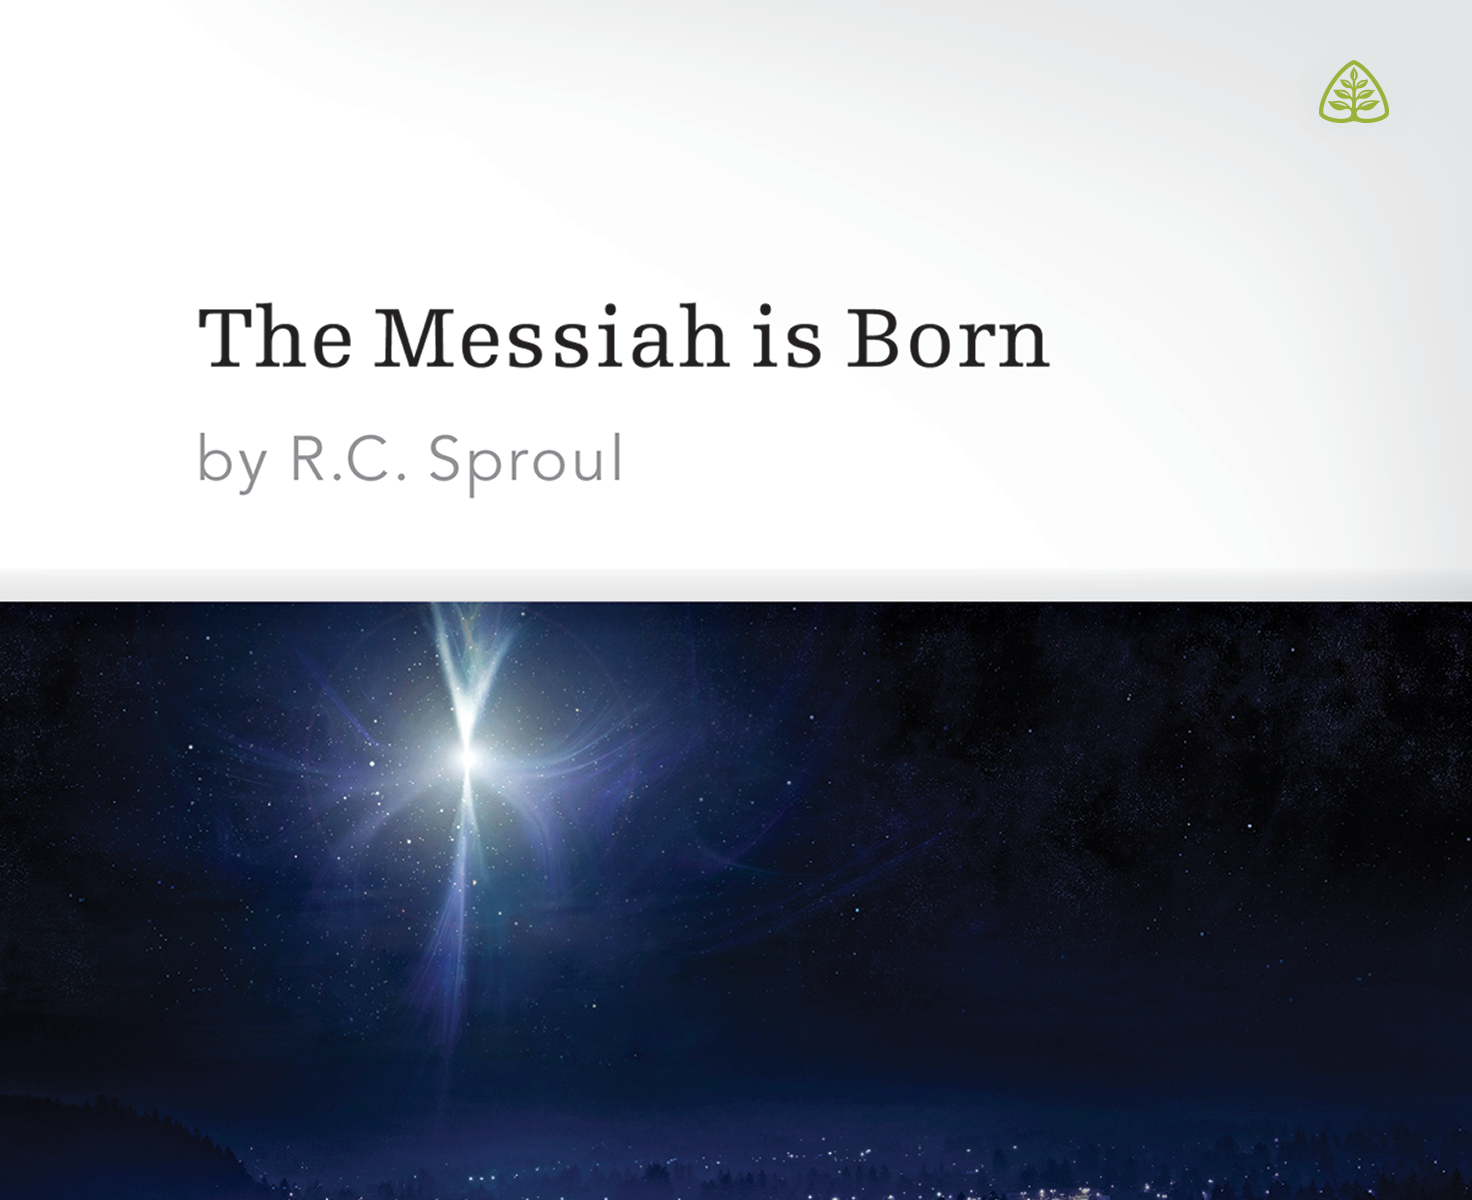 The Messiah is Born